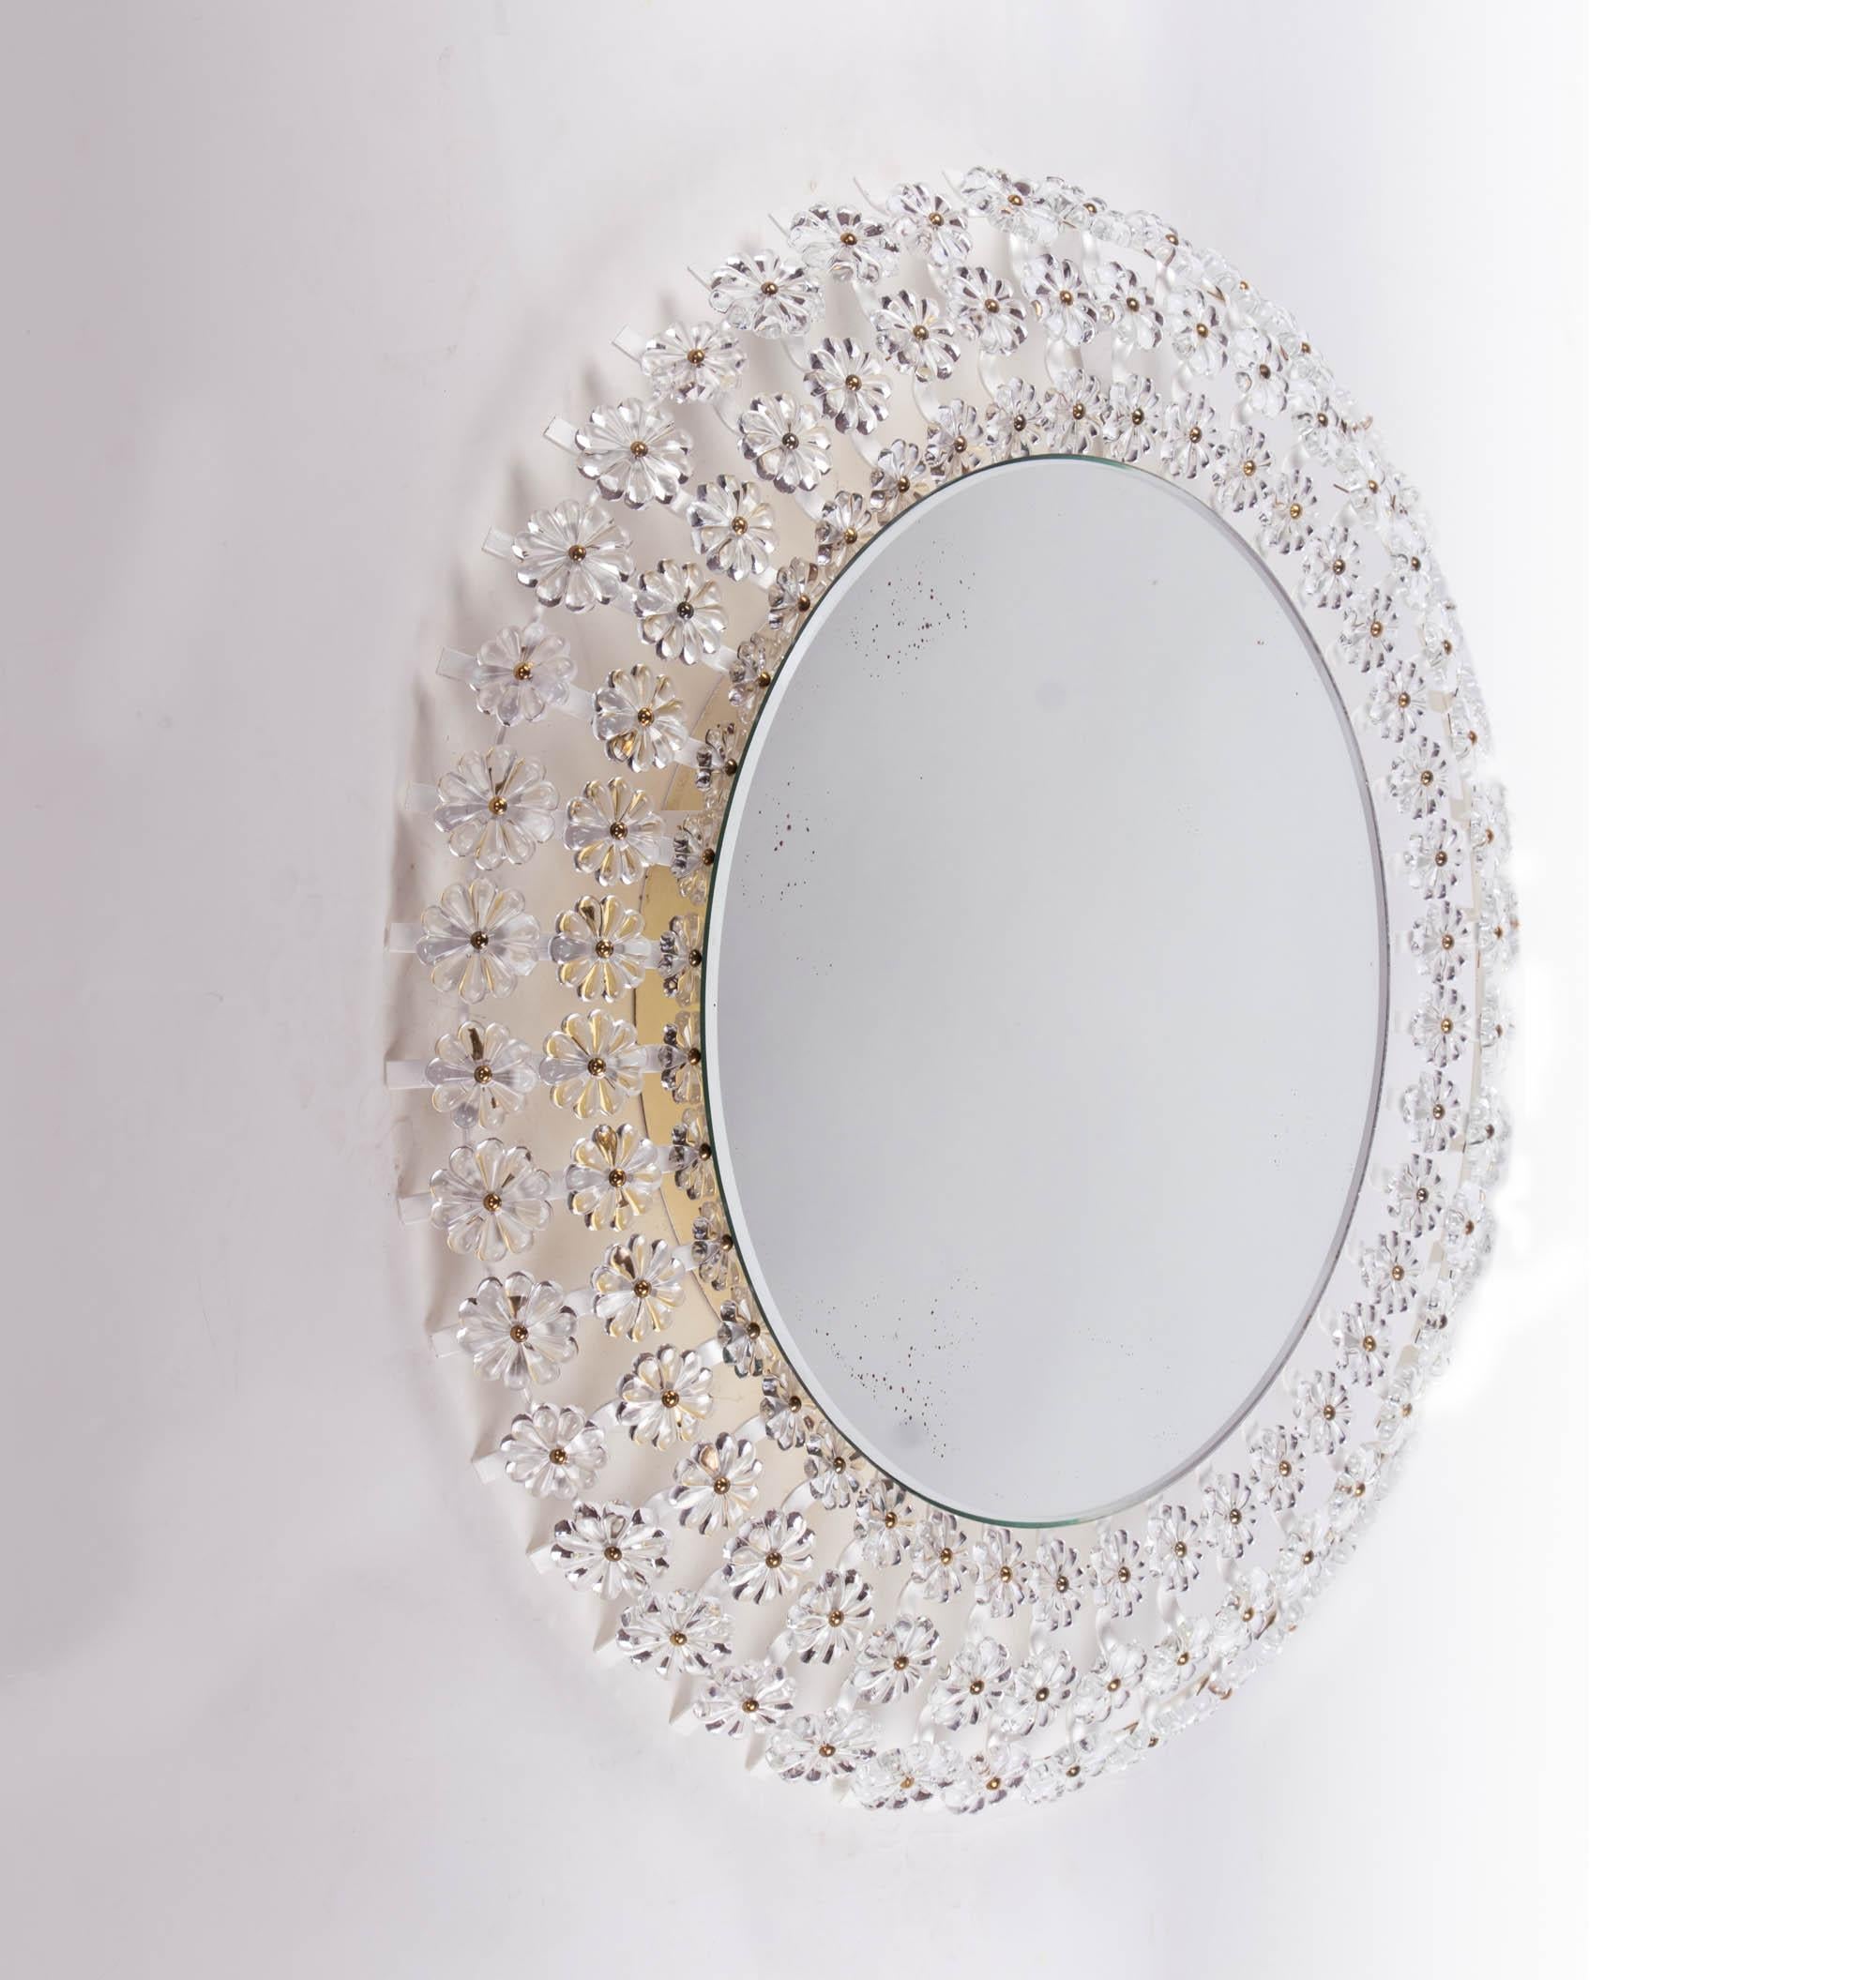 Gorgeous illuminated mirror in mid-century style surrounded by countless crystal flowers on a round mirror with an enameled metal frame. The backlit glass flowers arranged all around are reminiscent of a sunburst pattern. Rare design. The Mirror